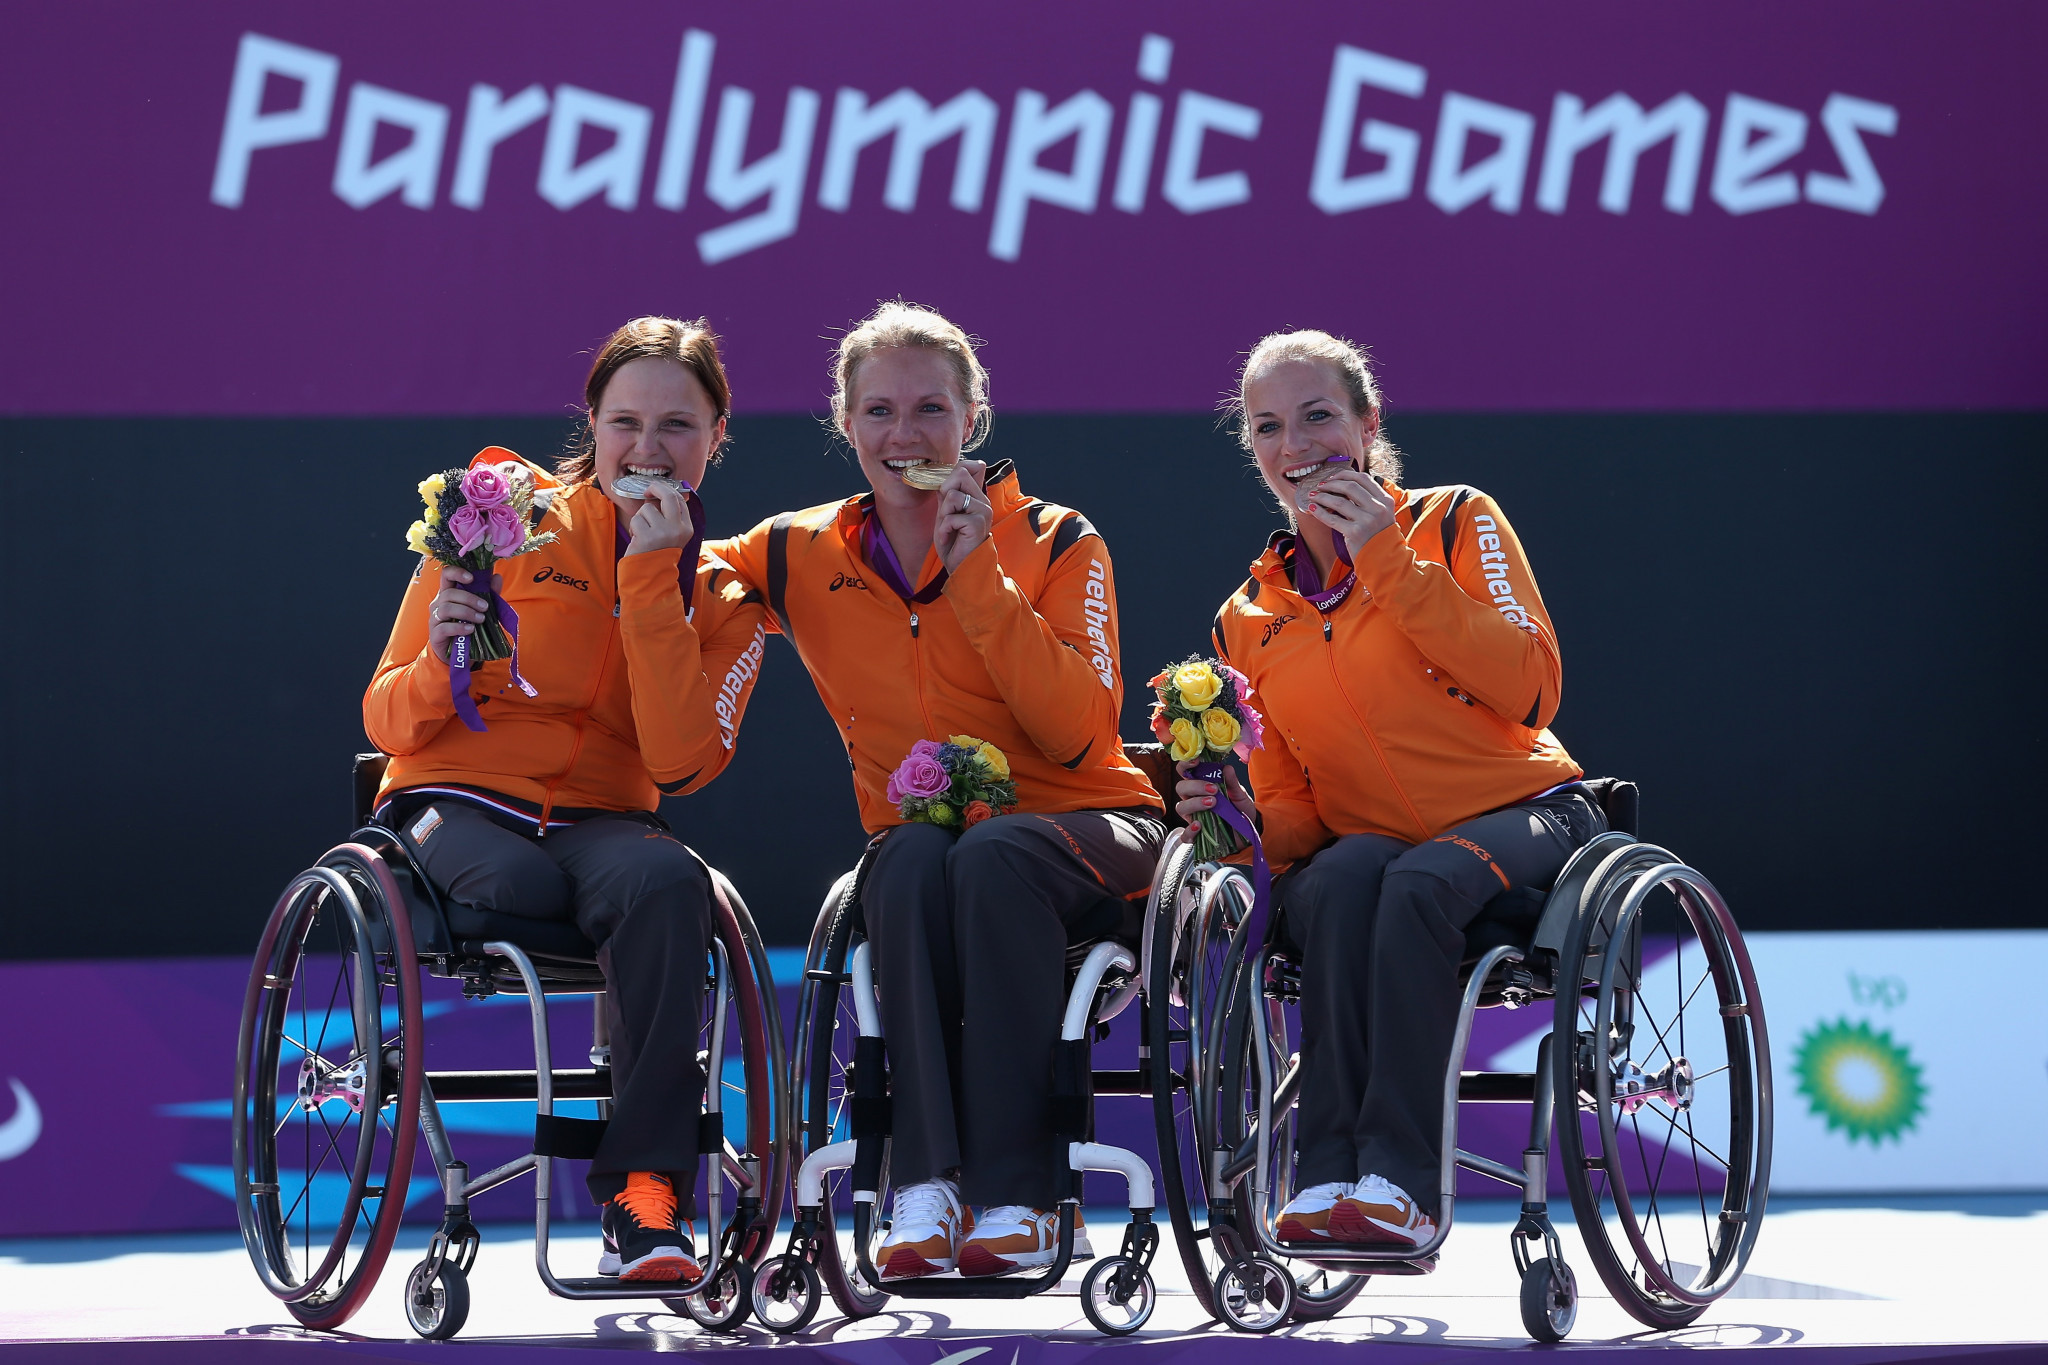 Esther Vergeer, centre, is joined by Jiske Griffioen, right, and Aniek van Koot, left, when The Netherlands completed a clean sweep of women's singles medals at London 2012 ©Getty Images